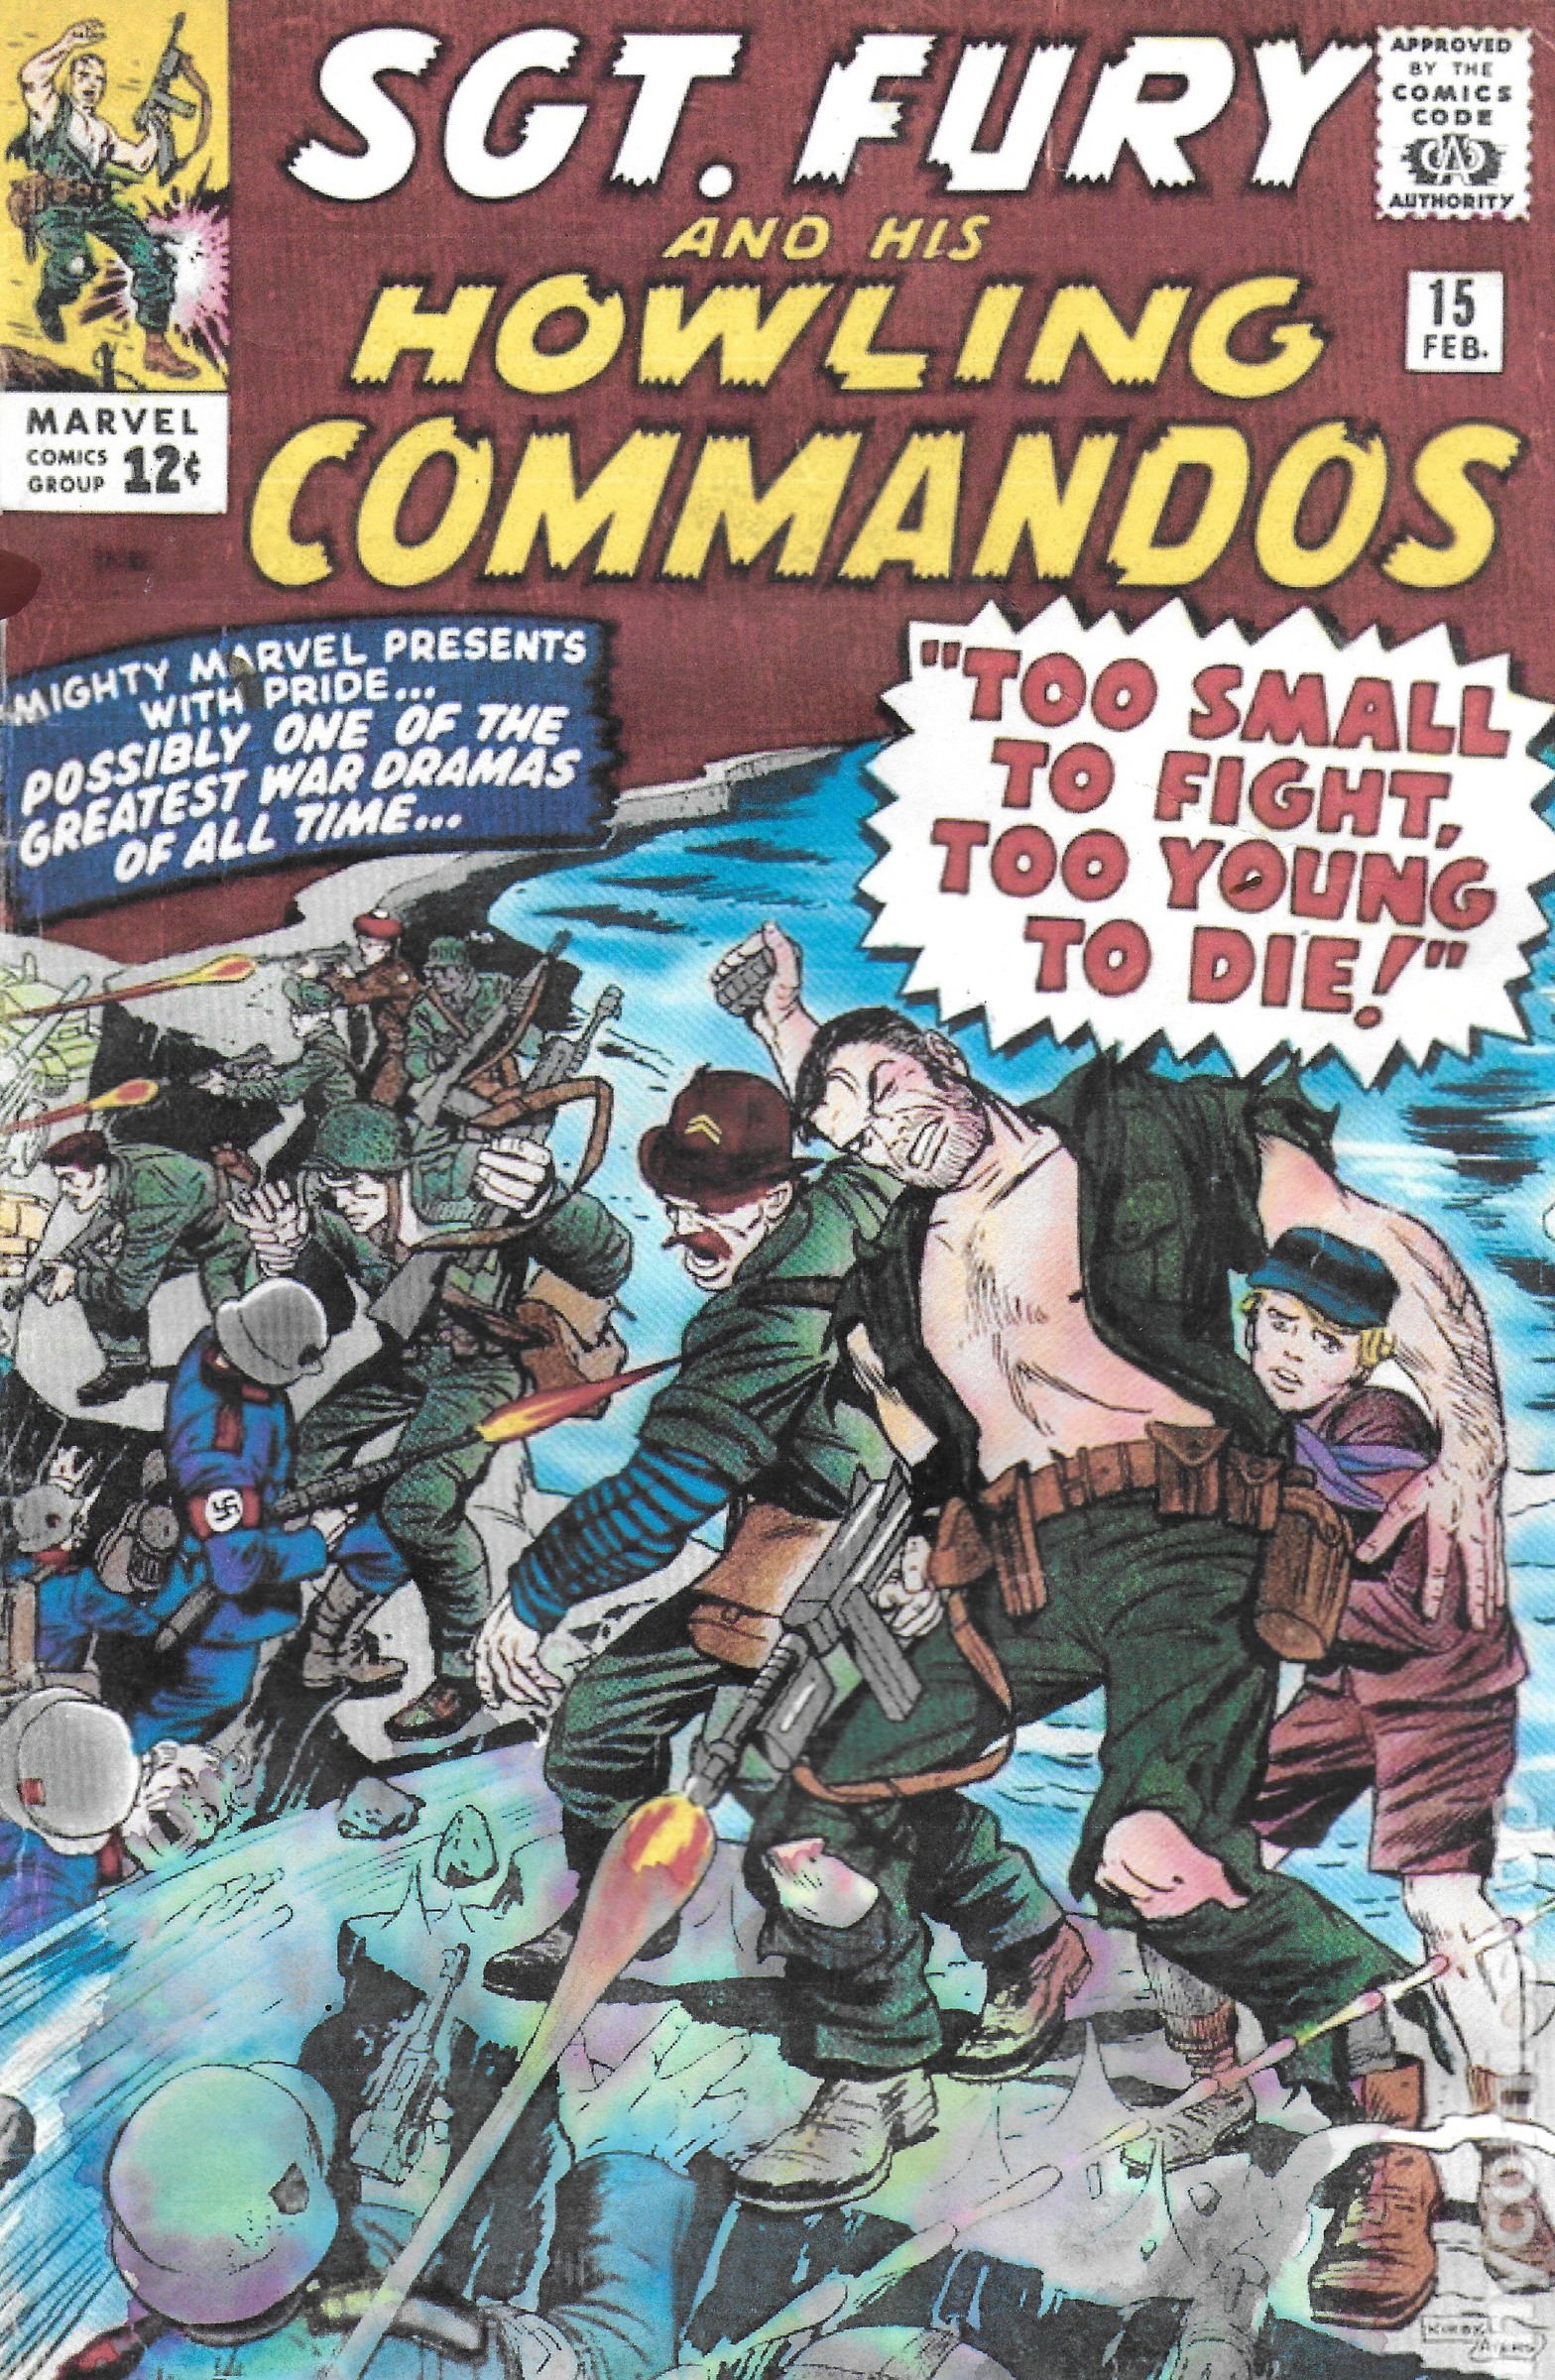 Ivan Morley&amp;#39;s personal copy of&amp;nbsp;Sgt. Fury and his Howling Commandos, Vol. 1, No. 15, published&amp;nbsp;by Marvel Comics,&amp;nbsp;February&amp;nbsp;15, 1965; the artist&amp;nbsp;hand-embellished the cover with watercolor as a study for&amp;nbsp;Sgt. Fury,&amp;nbsp;2020